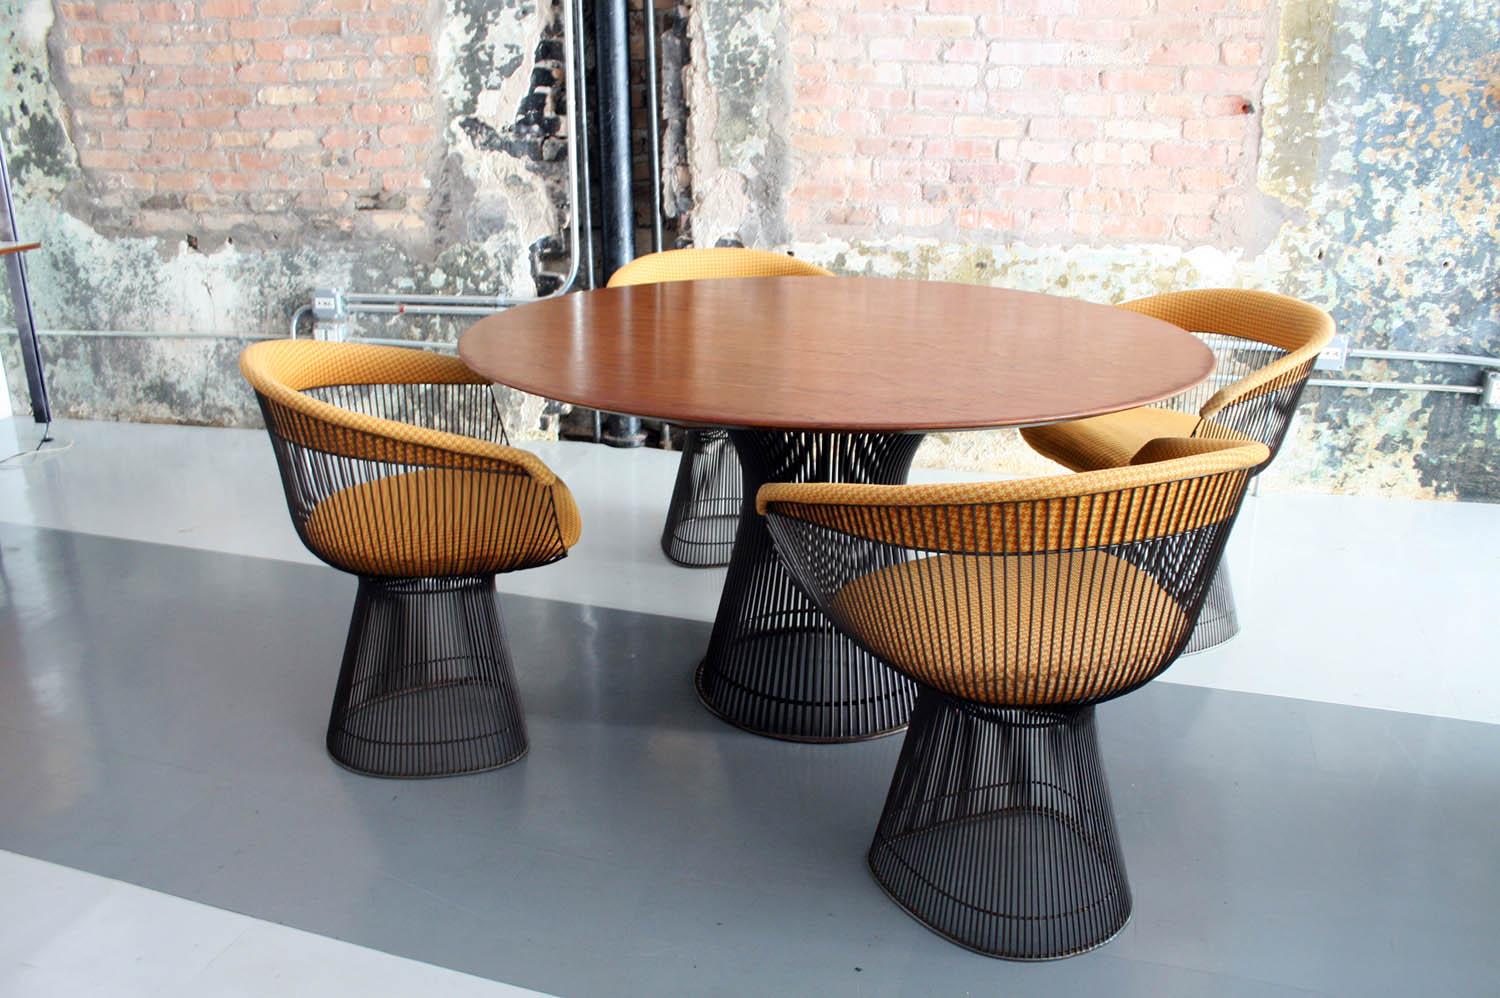 Original dining set by Warren Platner for Knoll. This set is in wonderful original condition. The walnut top of the dining table top is in very fine condition. A Knoll sticker is present to the underside of the table top. The bronze bases are all